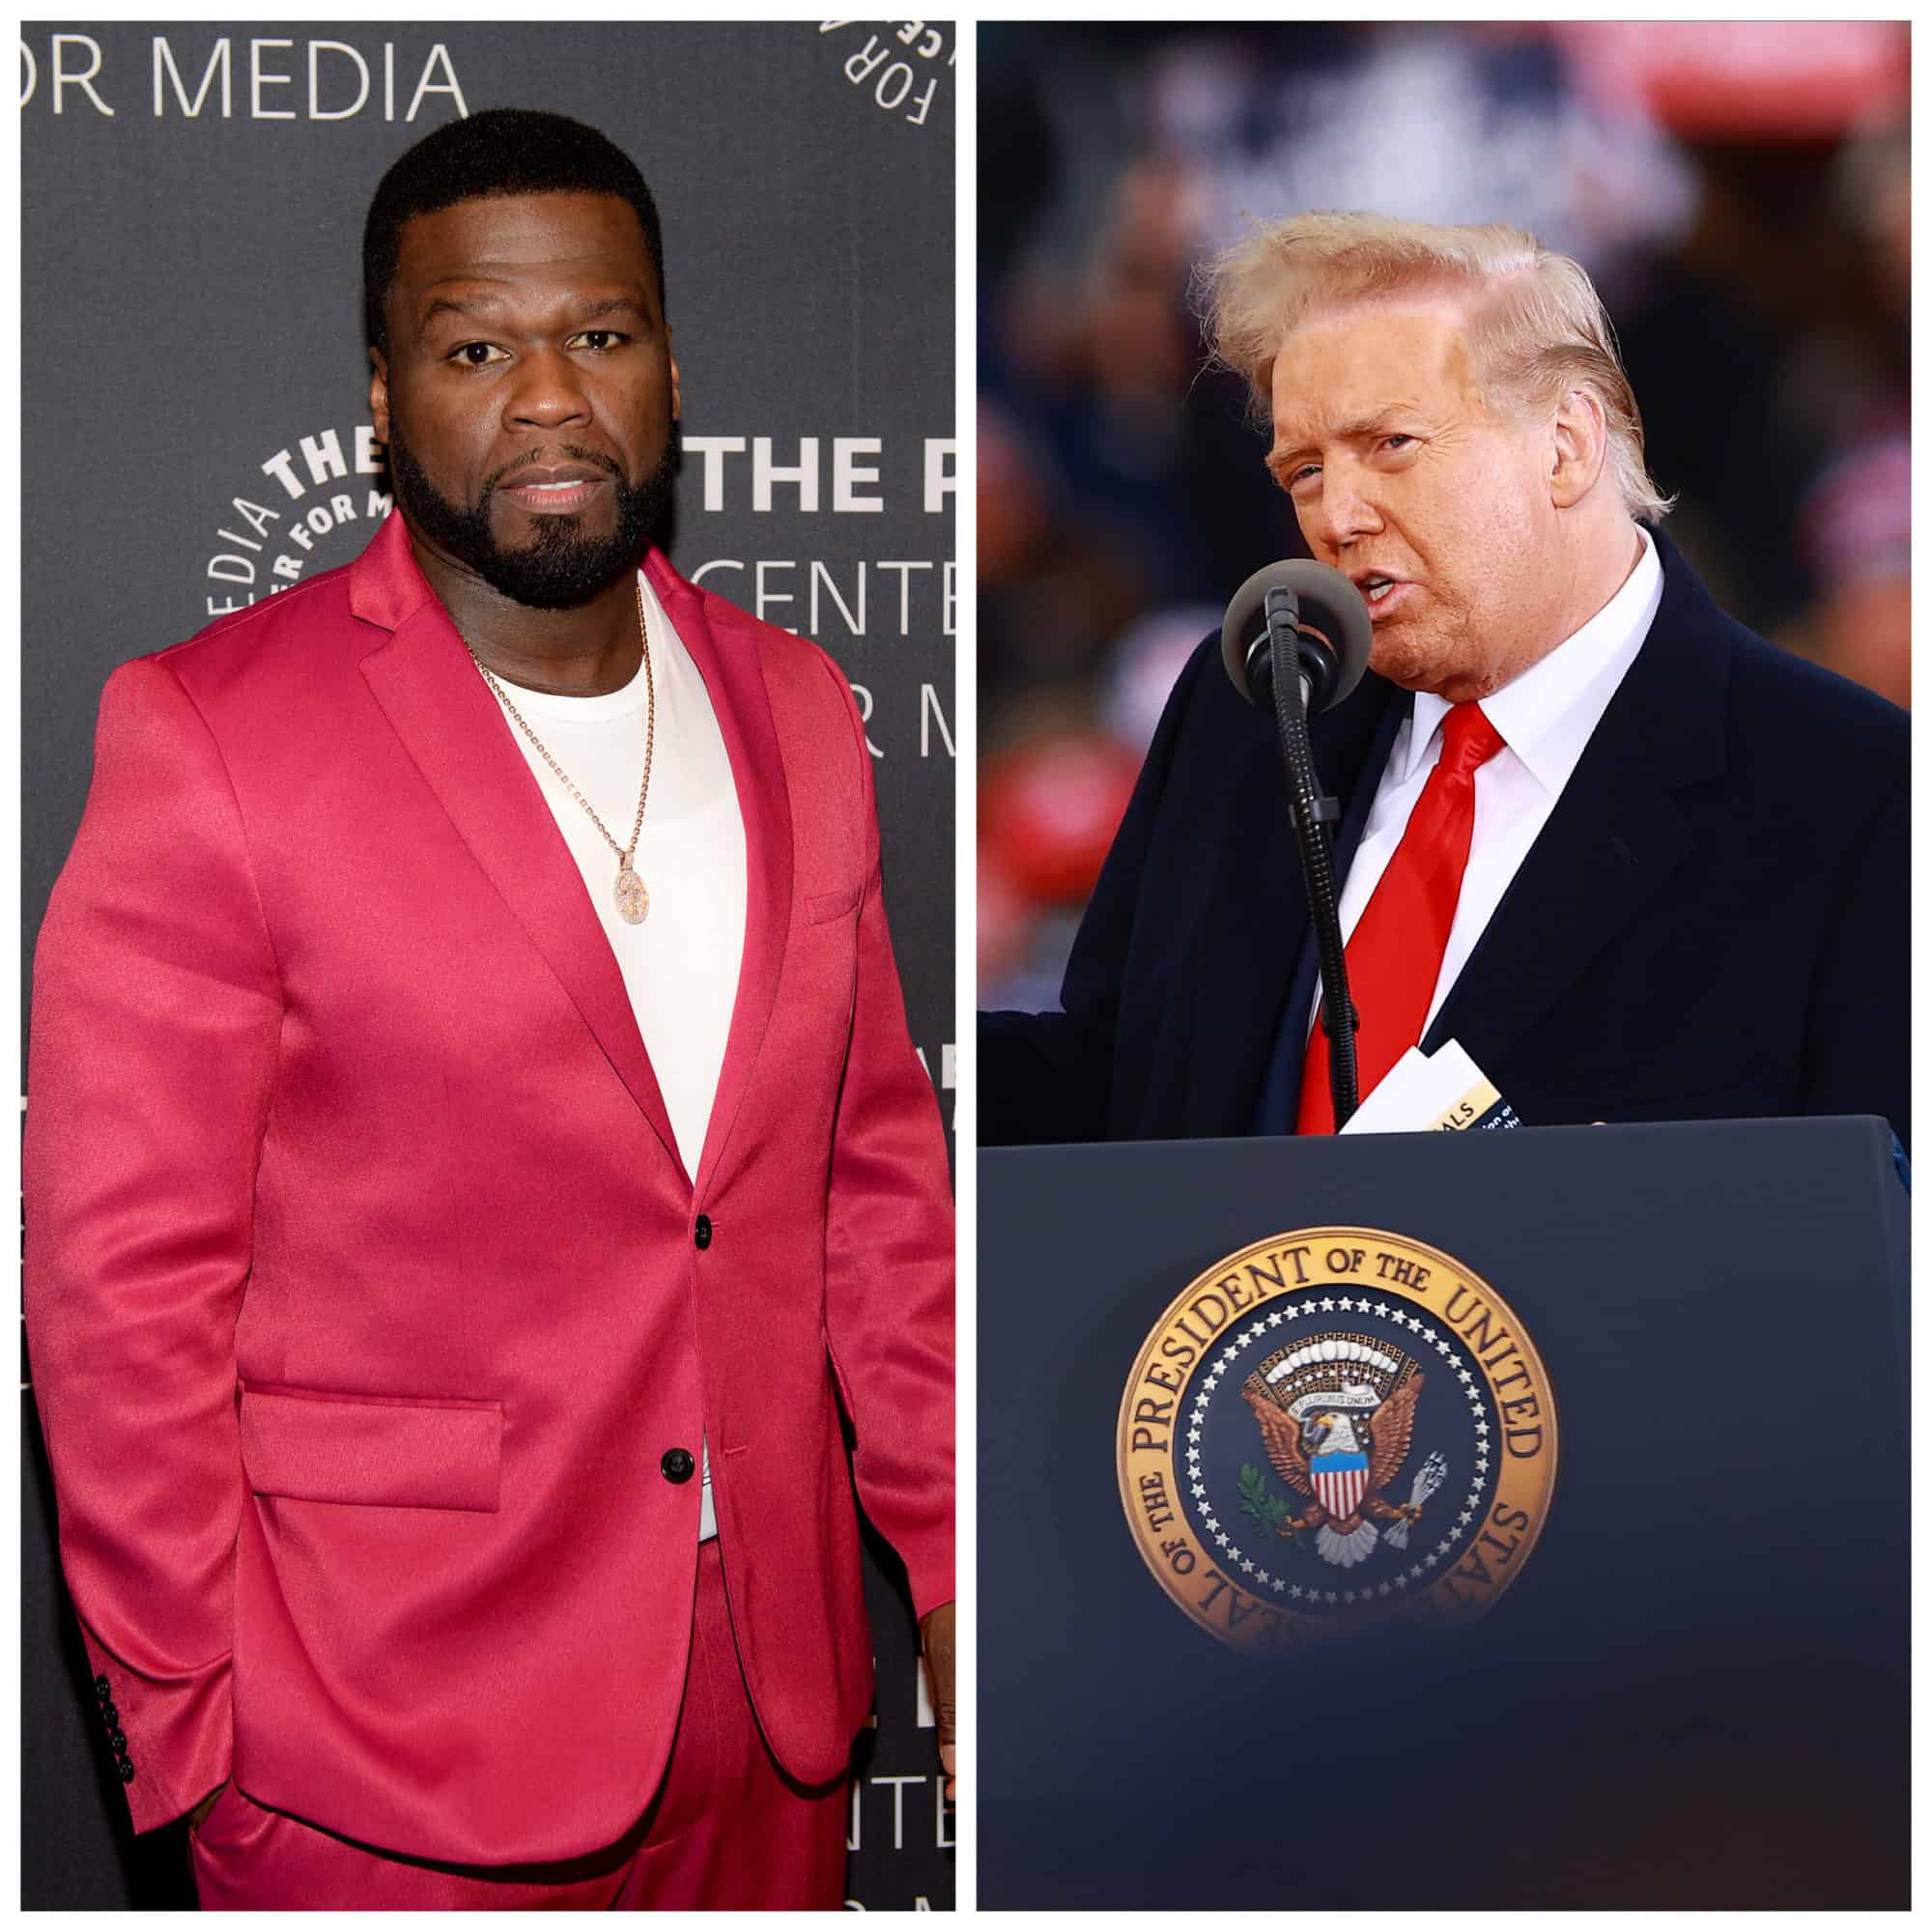 50 Cent Tells People To Vote For Trump After Sharing Report On Joe Biden’s Proposed Tax Plan